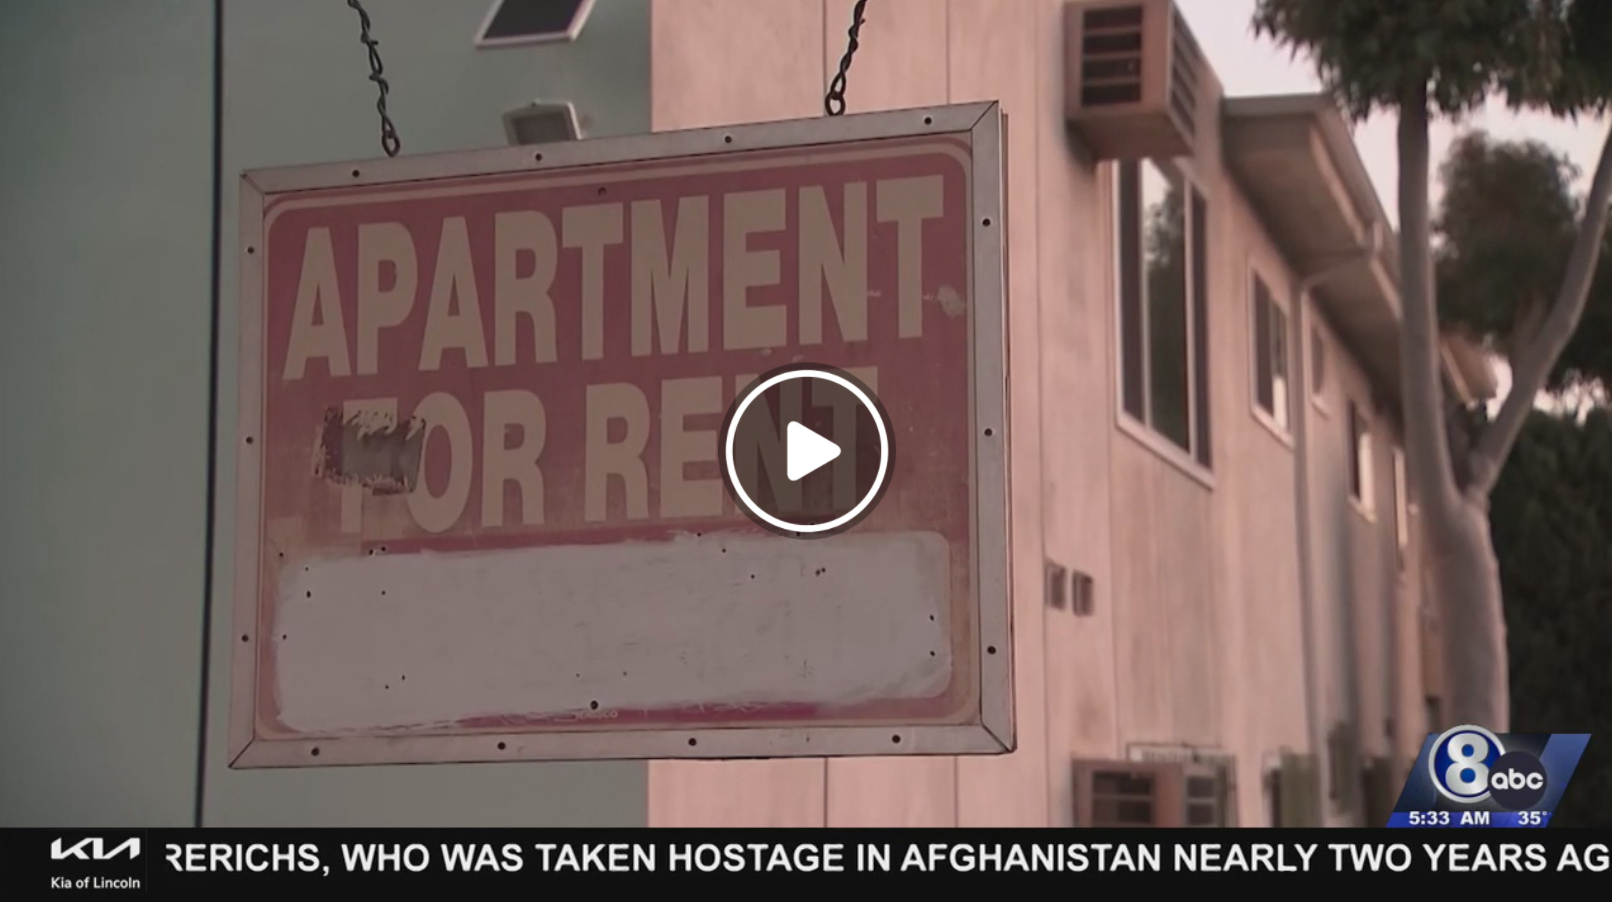 Screenshot of news story shows an Apartment for Rent sign